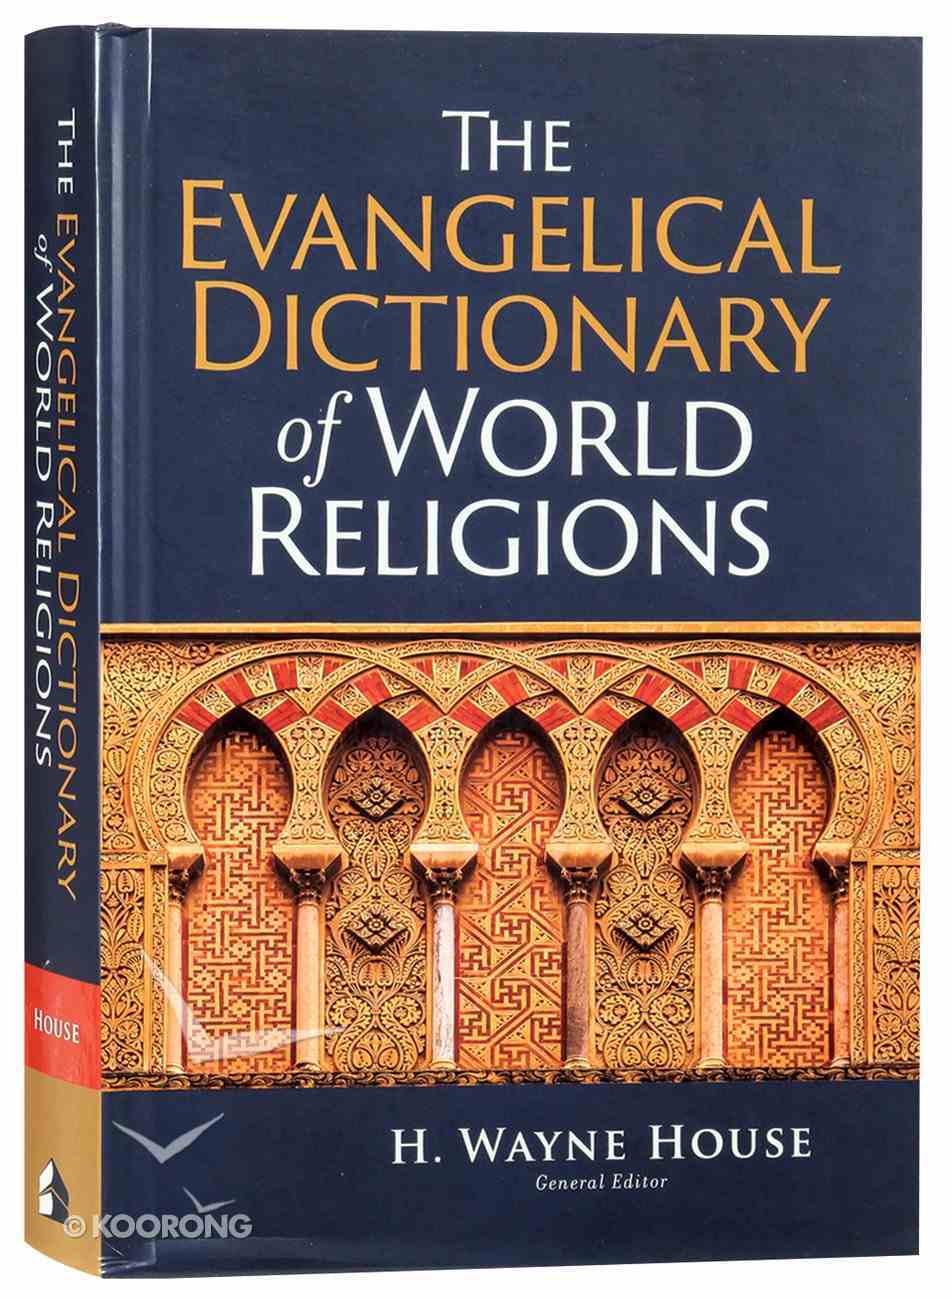 The Evangelical Dictionary of World Religions Hardback